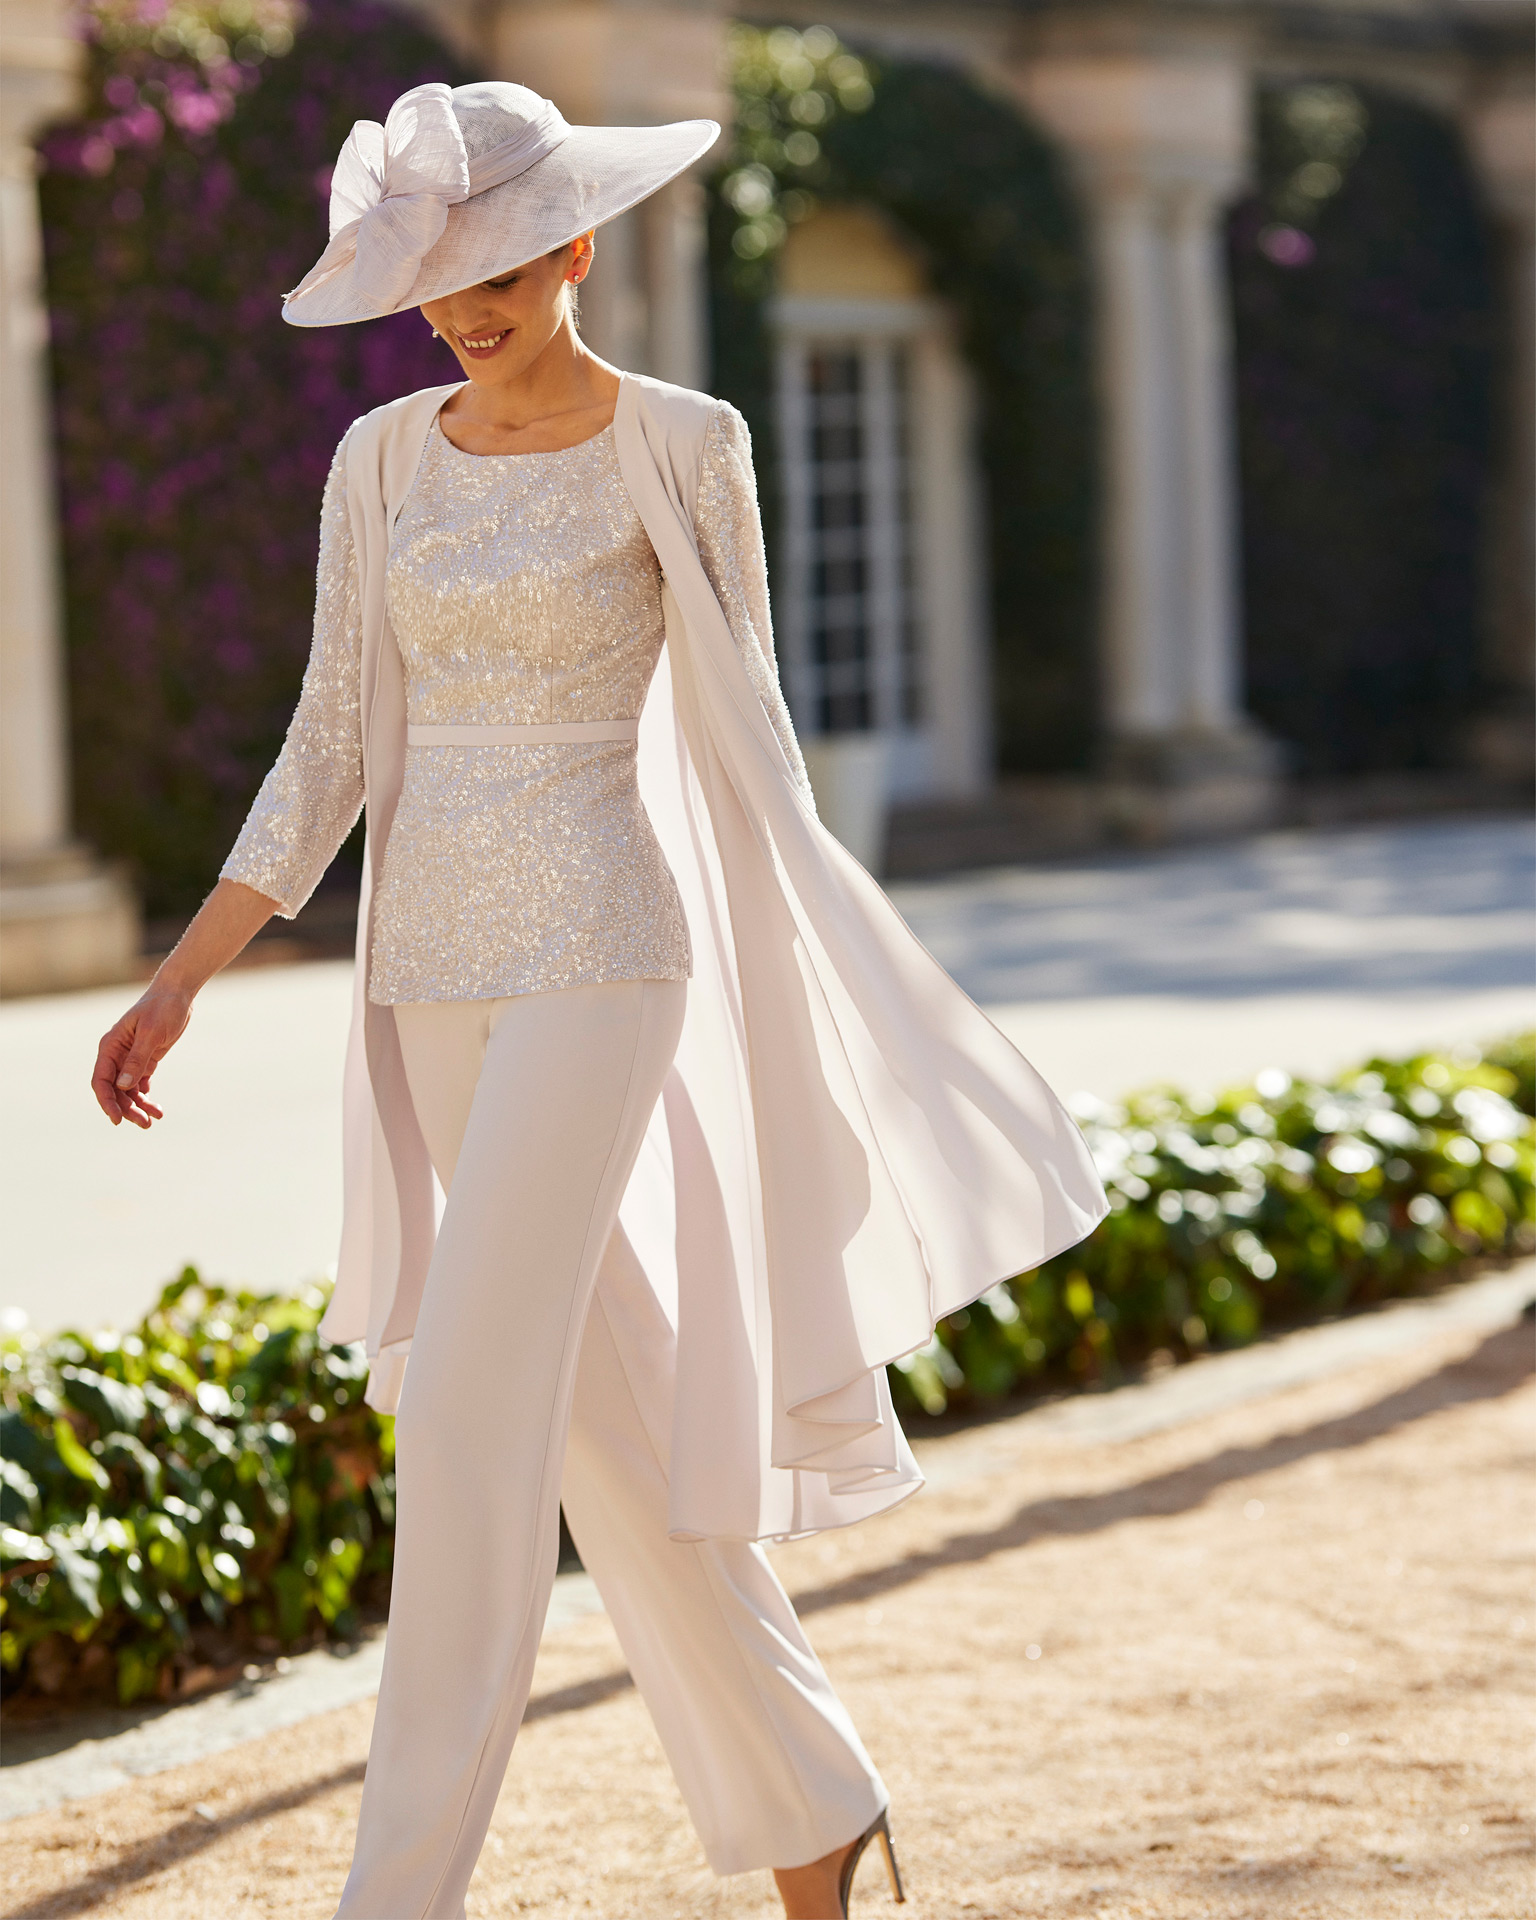 Modern cocktail pantsuit. Crafted in crêpe combined with beadwork. With round neckline, straps and jacket. Couture Club outfit for parties and events. MARFIL_BARCELONA.